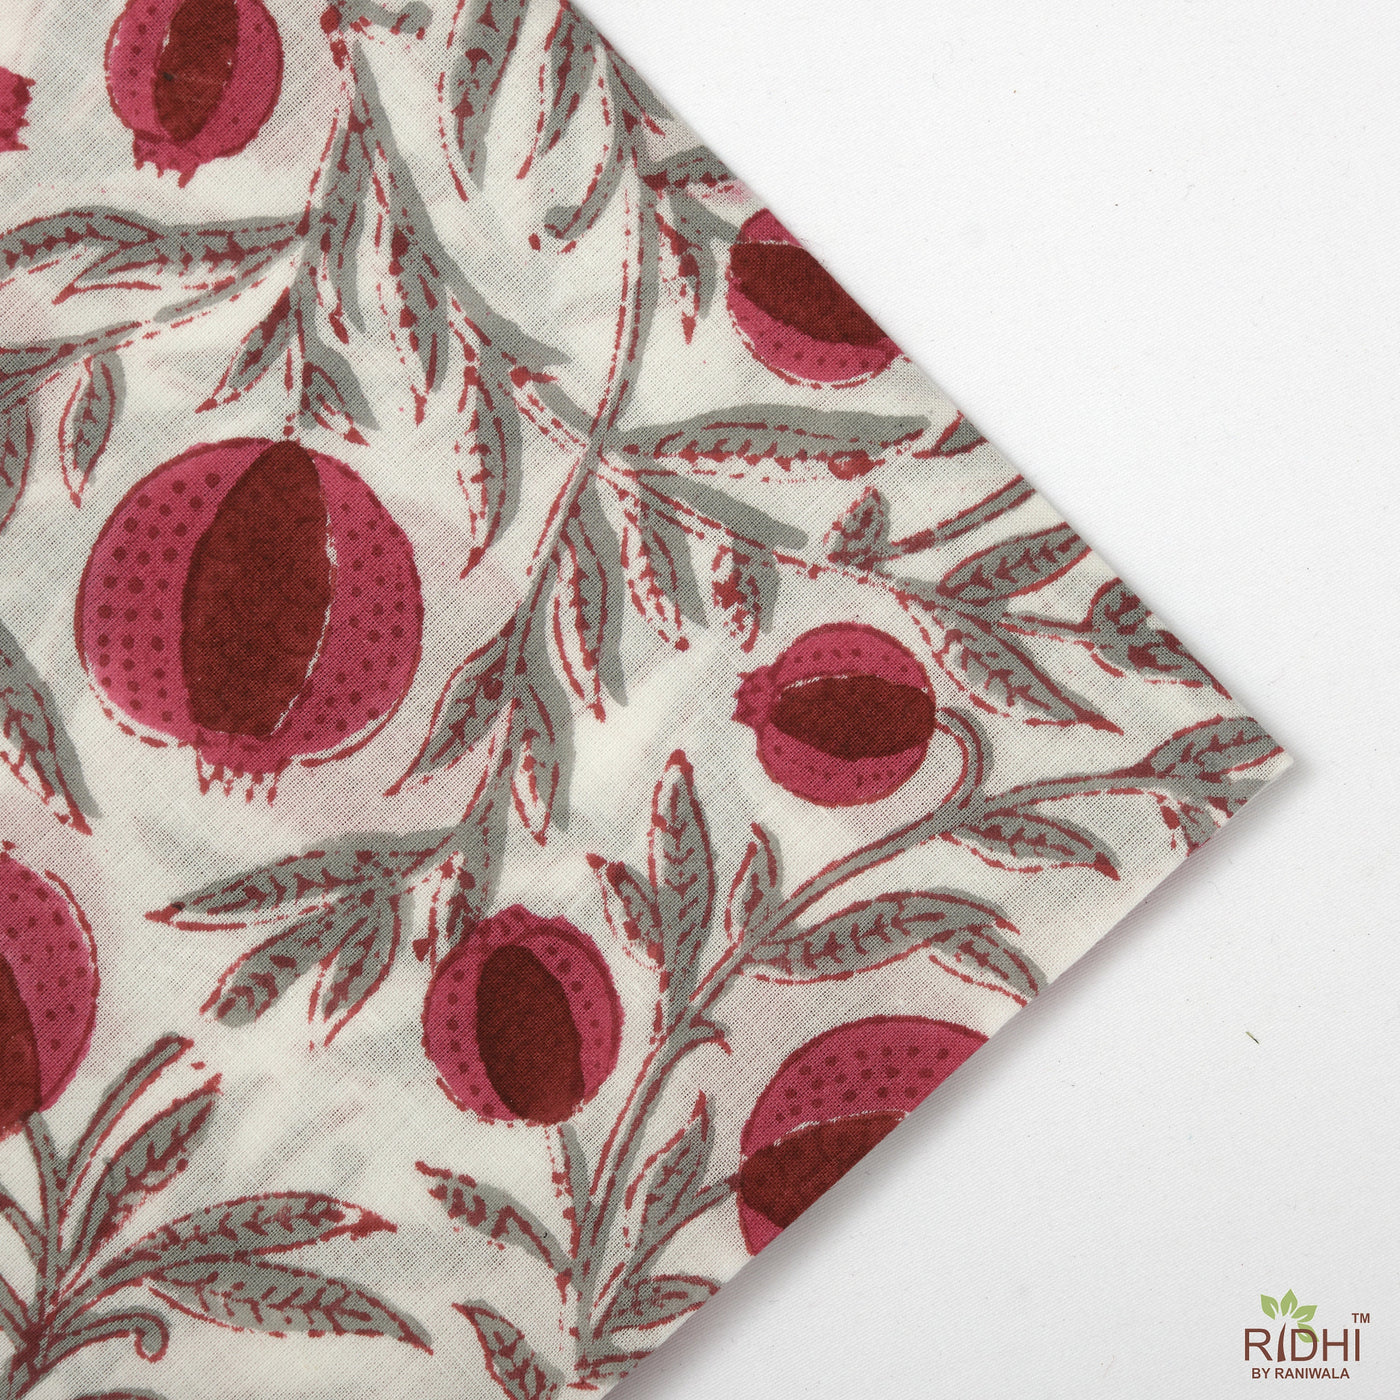 Fabricrush Thulian Pink, Red, Artichoke Green Indian Floral Hand Block Printed Cotton Cloth Napkins, 18x18"- Cocktail Napkins, 20x20"- Dinner Napkins